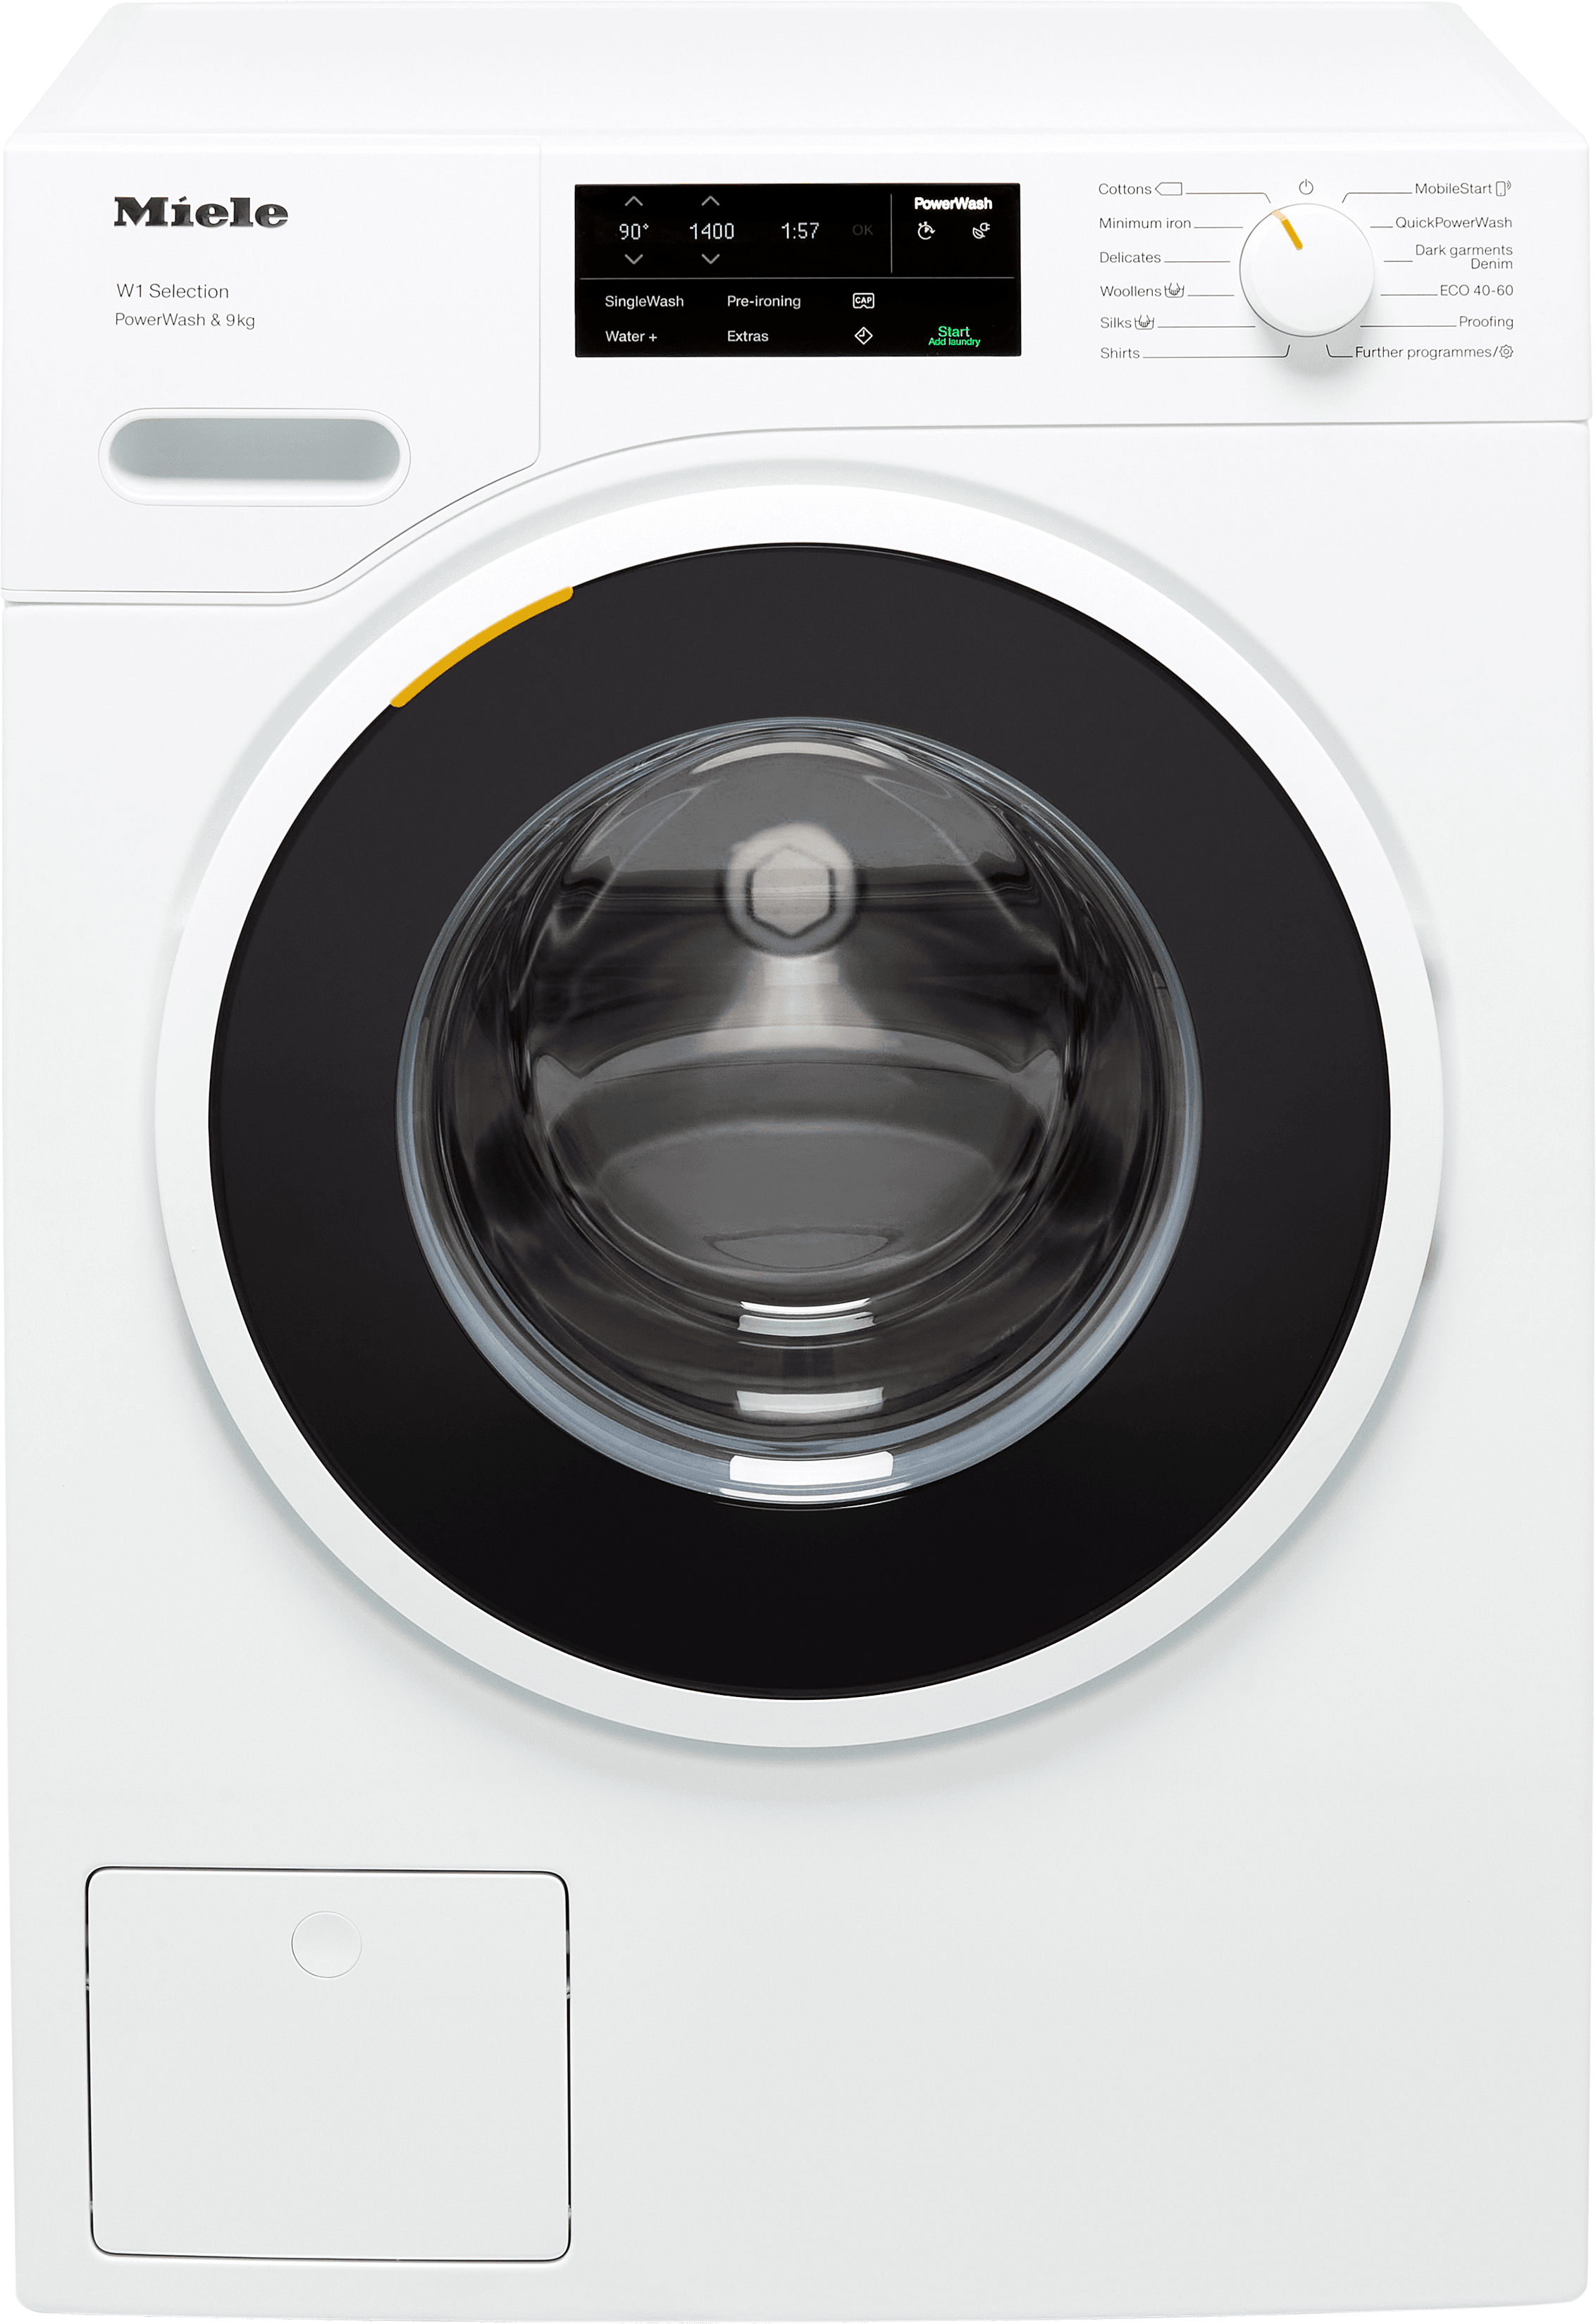 Miele W1 WSG363 9kg Washing Machine with 1400 rpm - White - A Rated, White